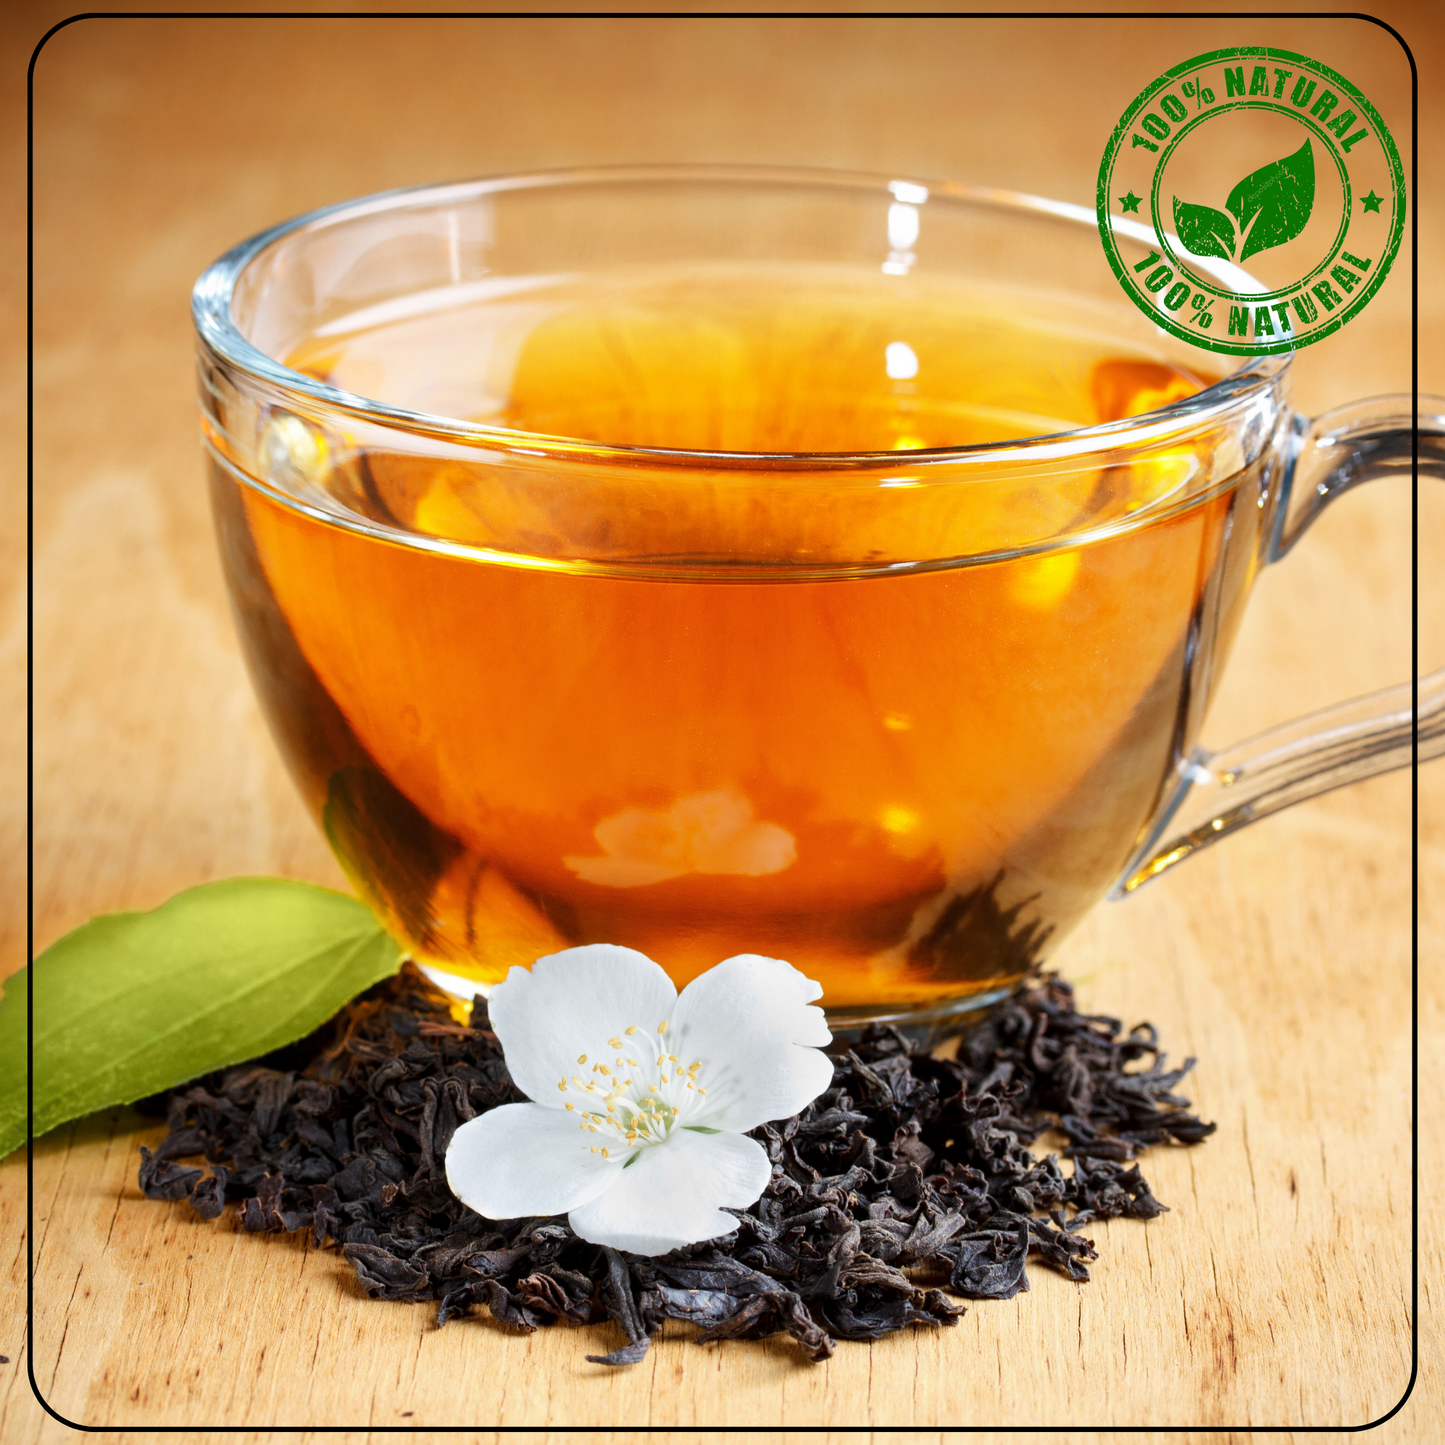 BEAUTEA China Jasmine Green Leaf - The secret to your well-being with its fragrant and nourishing qualities - Radhikas Fine Teas and Whatnots